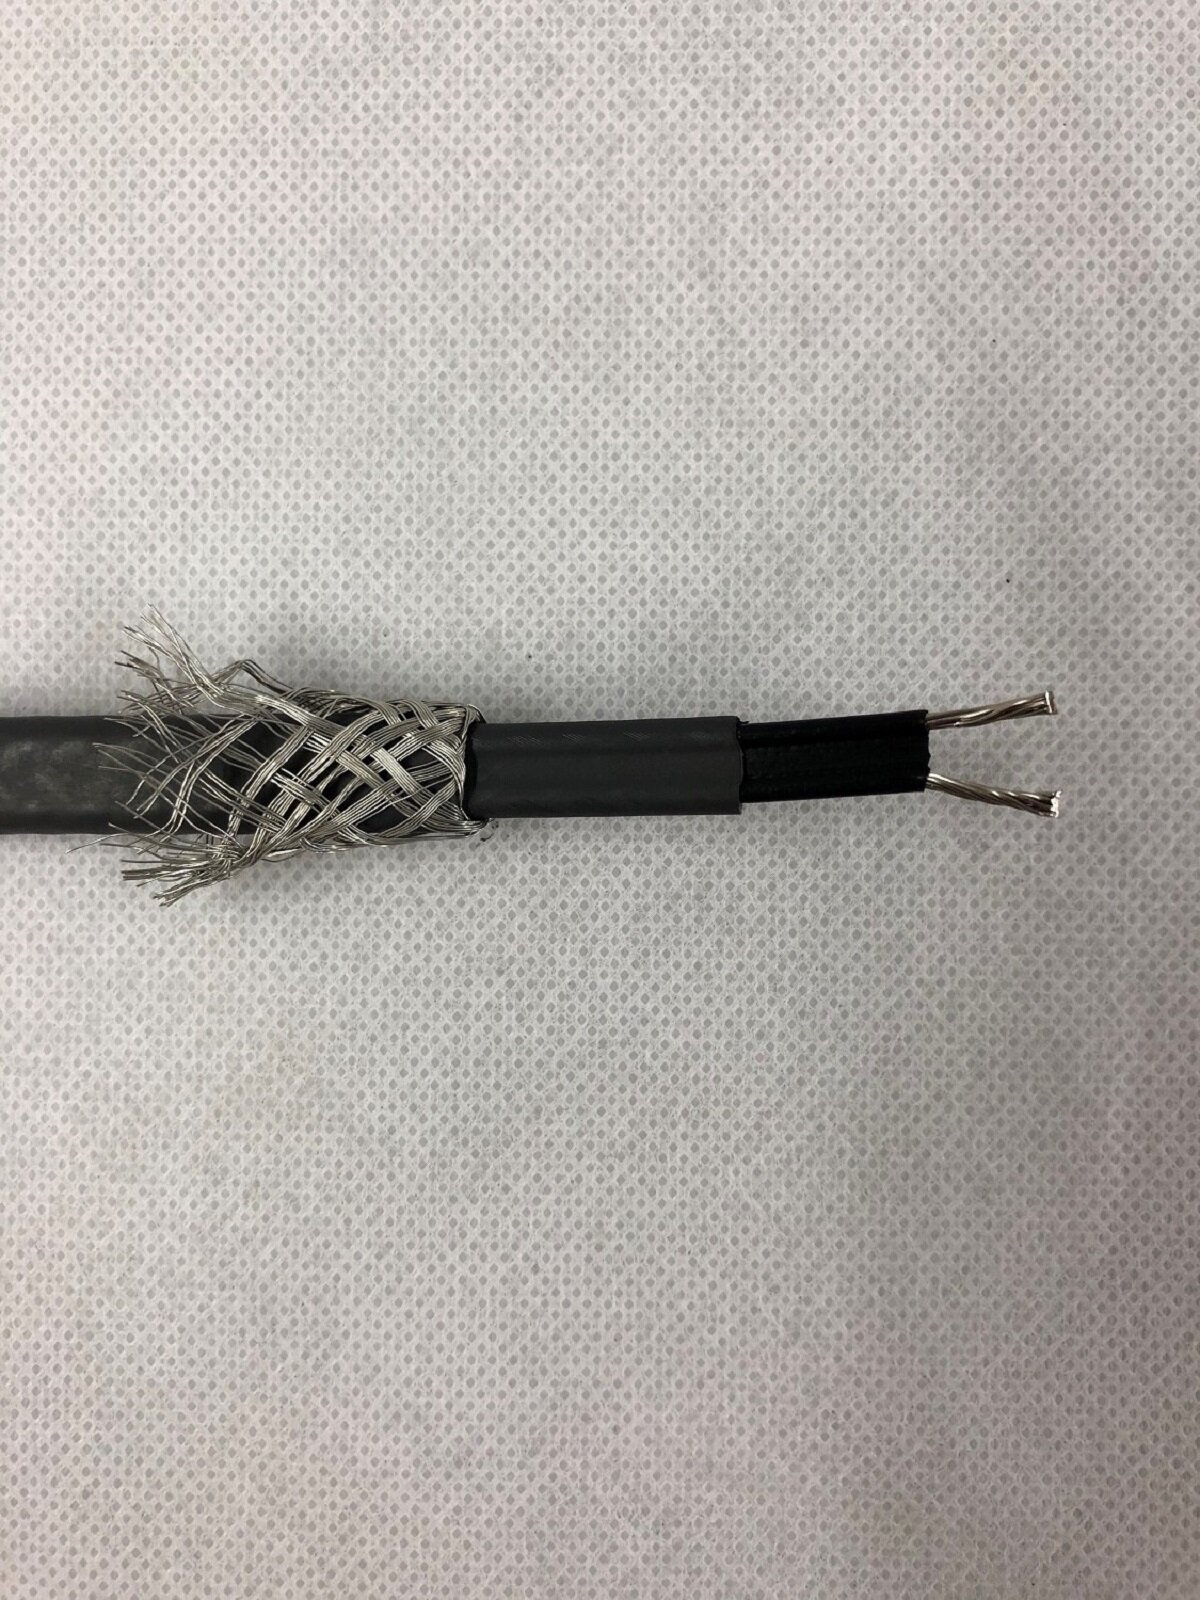 Material components of self-regulating cable